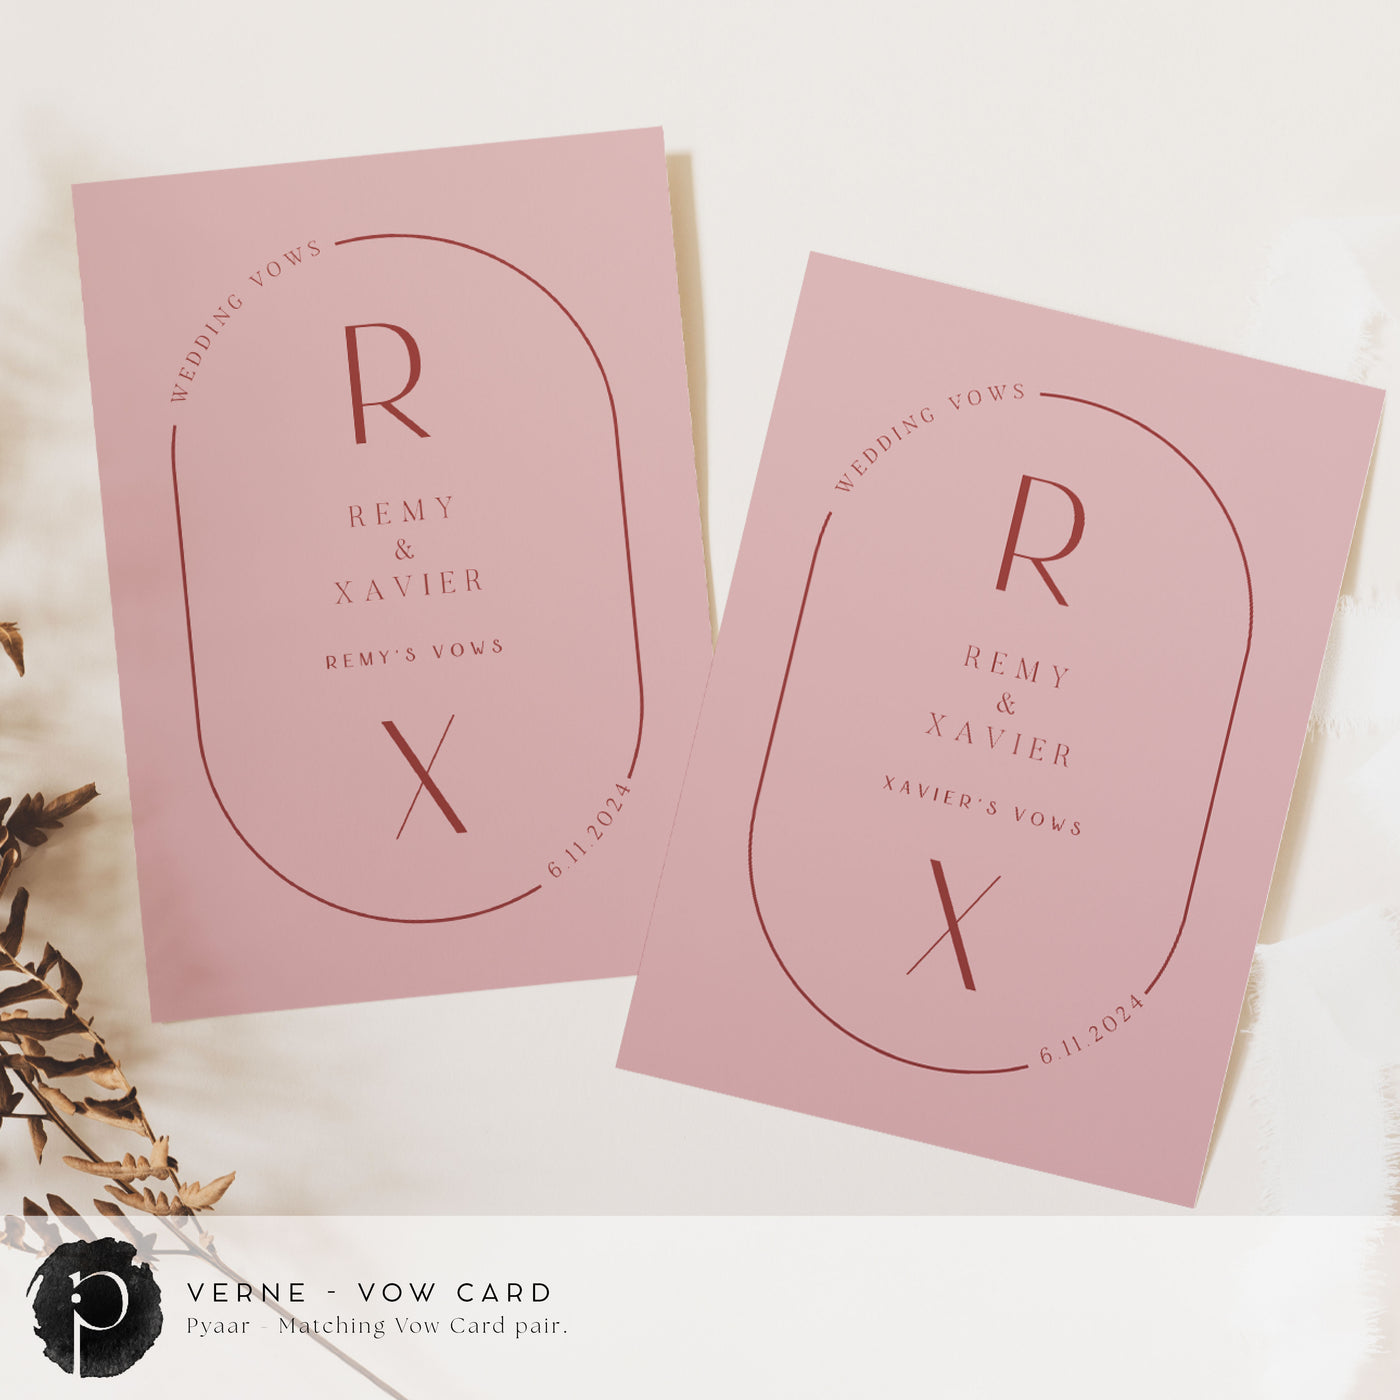 A pair of vow cards to write your wedding vows on in a modern midcentury wedding theme with burgundy writing on a dark rose pink background